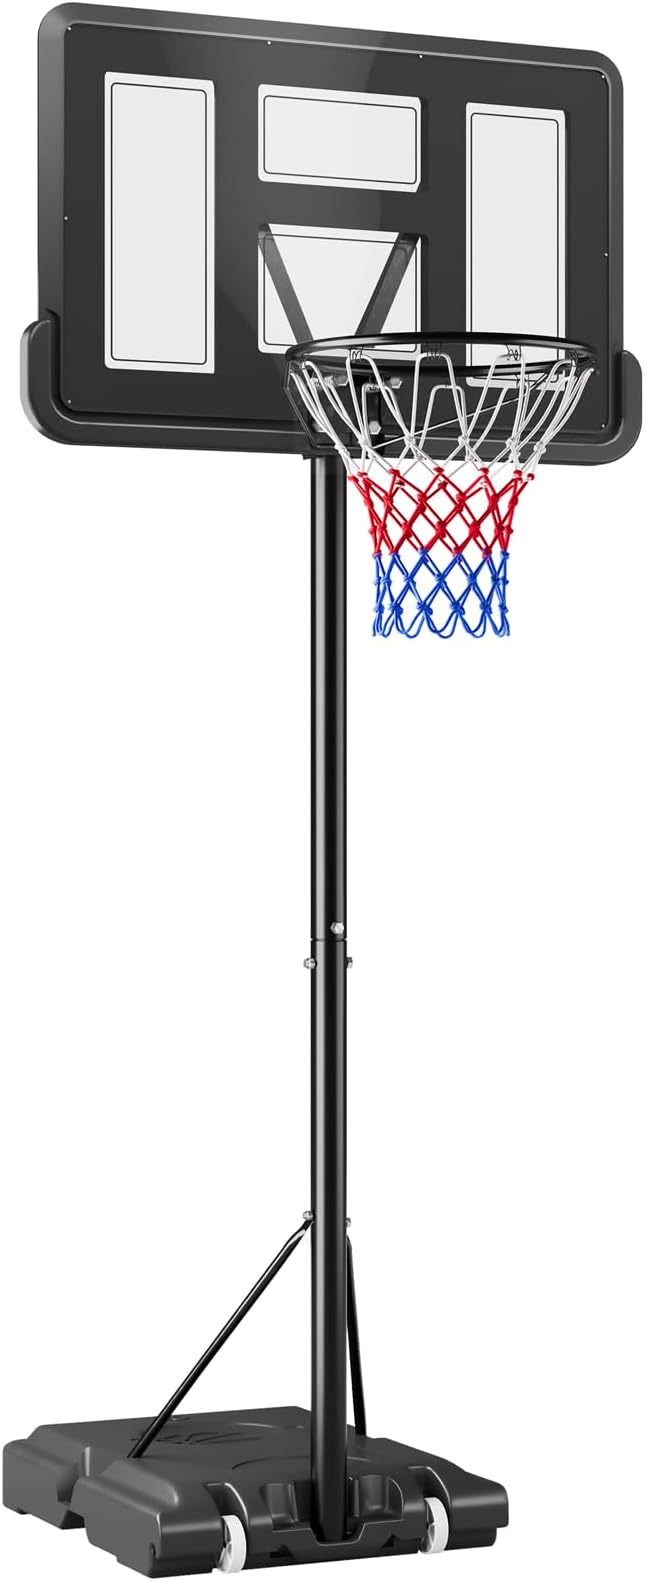 dripex portable basketball hoop 10ft outdoor adjustable goal system 44in backboard for kids  ?dripex